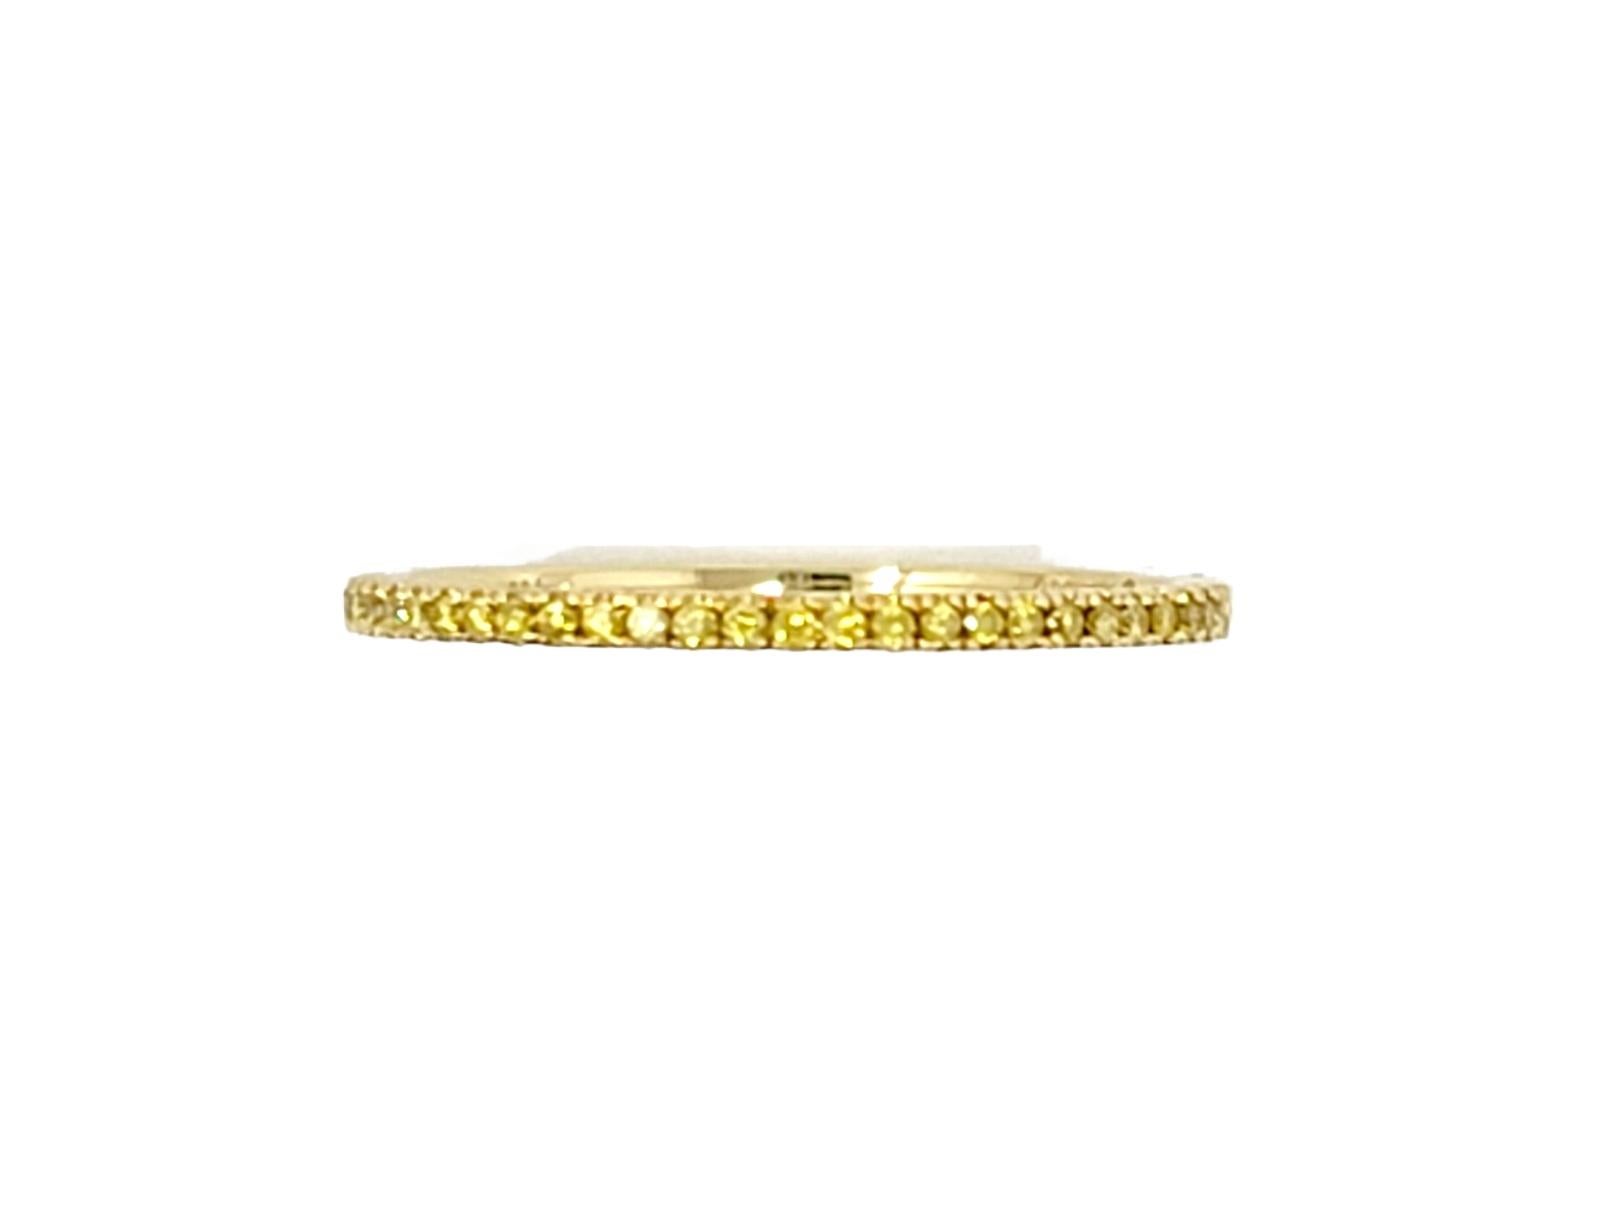 Delicate golden micro-pave yellow diamond semi eternity band ring by Hidalgo offers sleek simplicity and modern elegance. 

Ring size: 6.5
Metal: 18K Yellow Gold
Weight: 1.3 grams
Natural Diamond: .09 ctw
Diamond cut: Round brilliant
Diamond color: